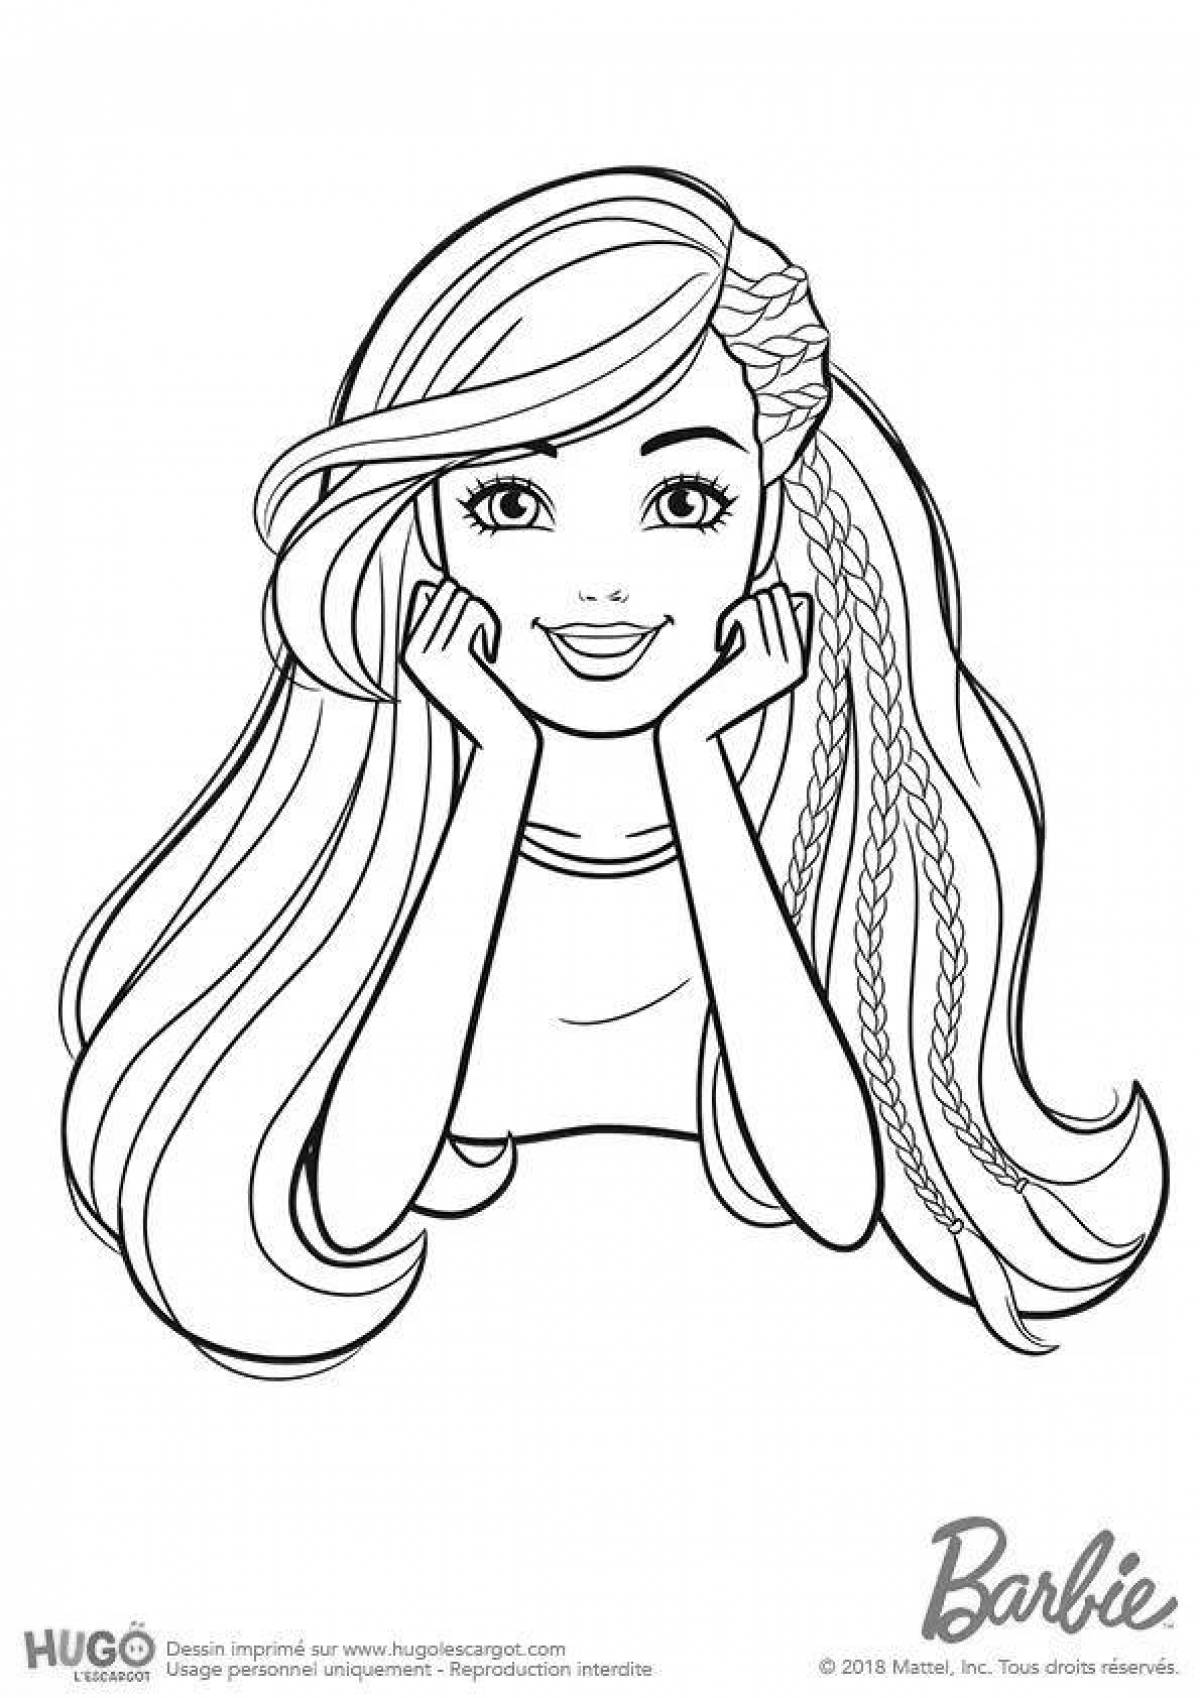 Playful barbie coloring page